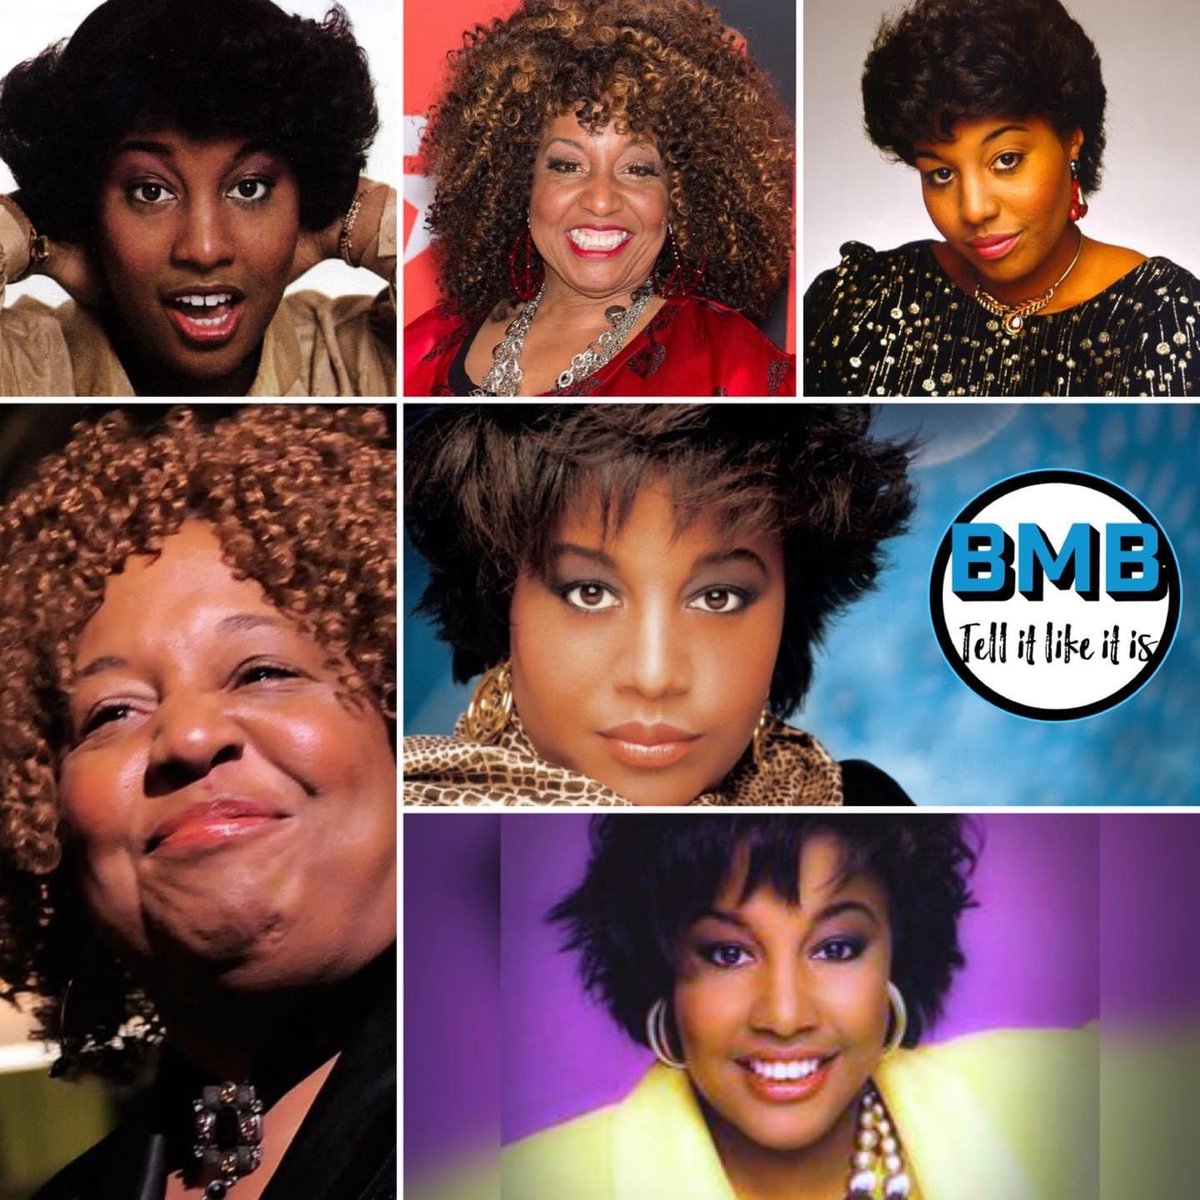 🎉🎈🥳🎂Happy Birthday To Cheryl Lynn, Ms. Lynn is an American singer. She is best known for her songs during the late 1970s through the mid-1980s, including the 1978 R&B/disco song 'Got to Be Real'.
#happybirthday #CherylLynn #gottobereal #encore #ifthisworldweremine